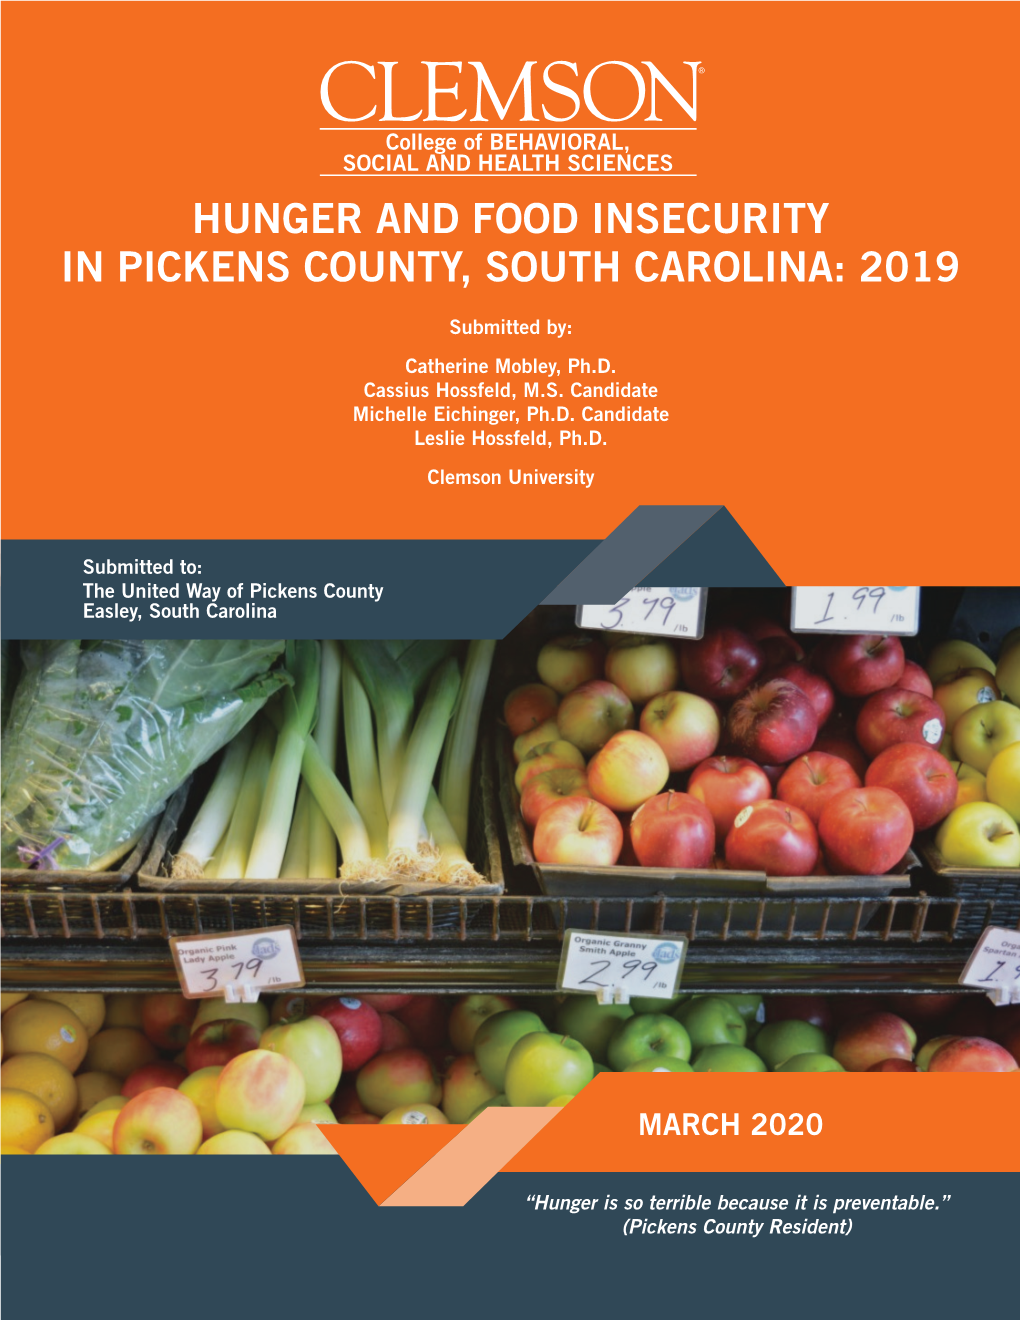 Hunger and Food Insecurity in Pickens County, South Carolina: 2019